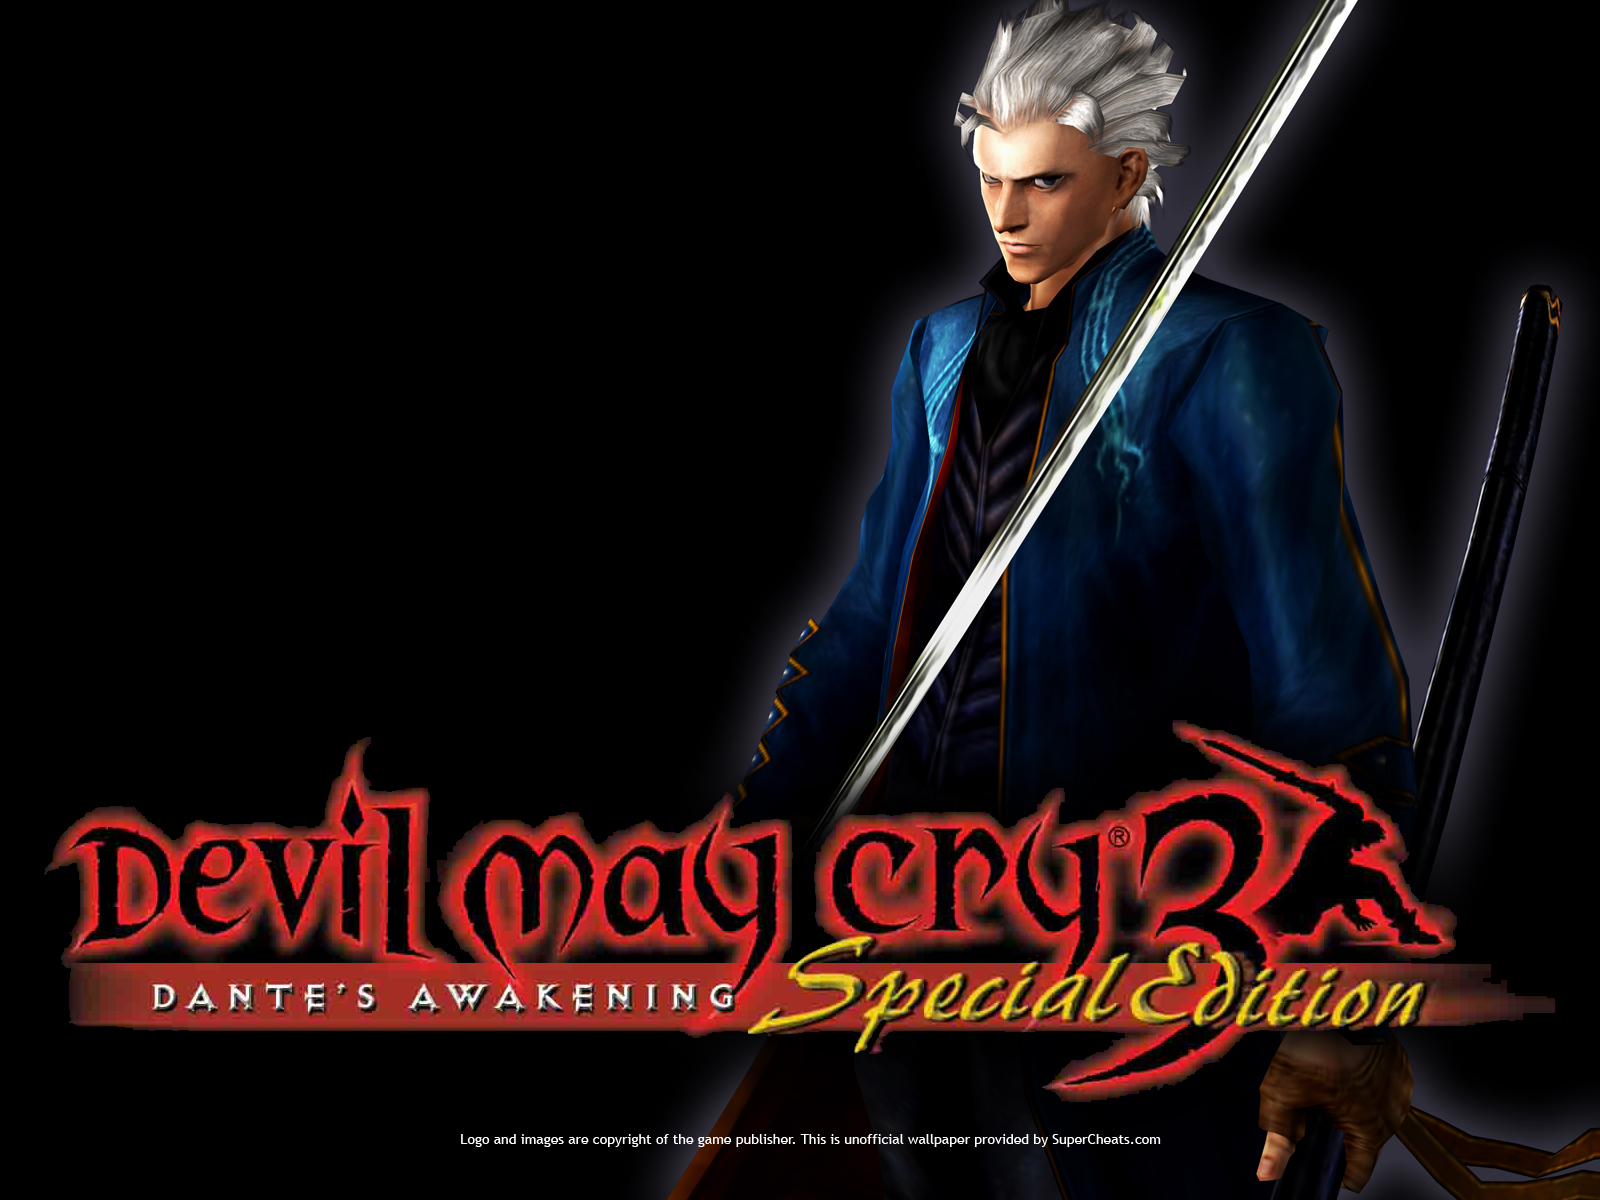 Devil+may+cry+3+special+edition+pc+download